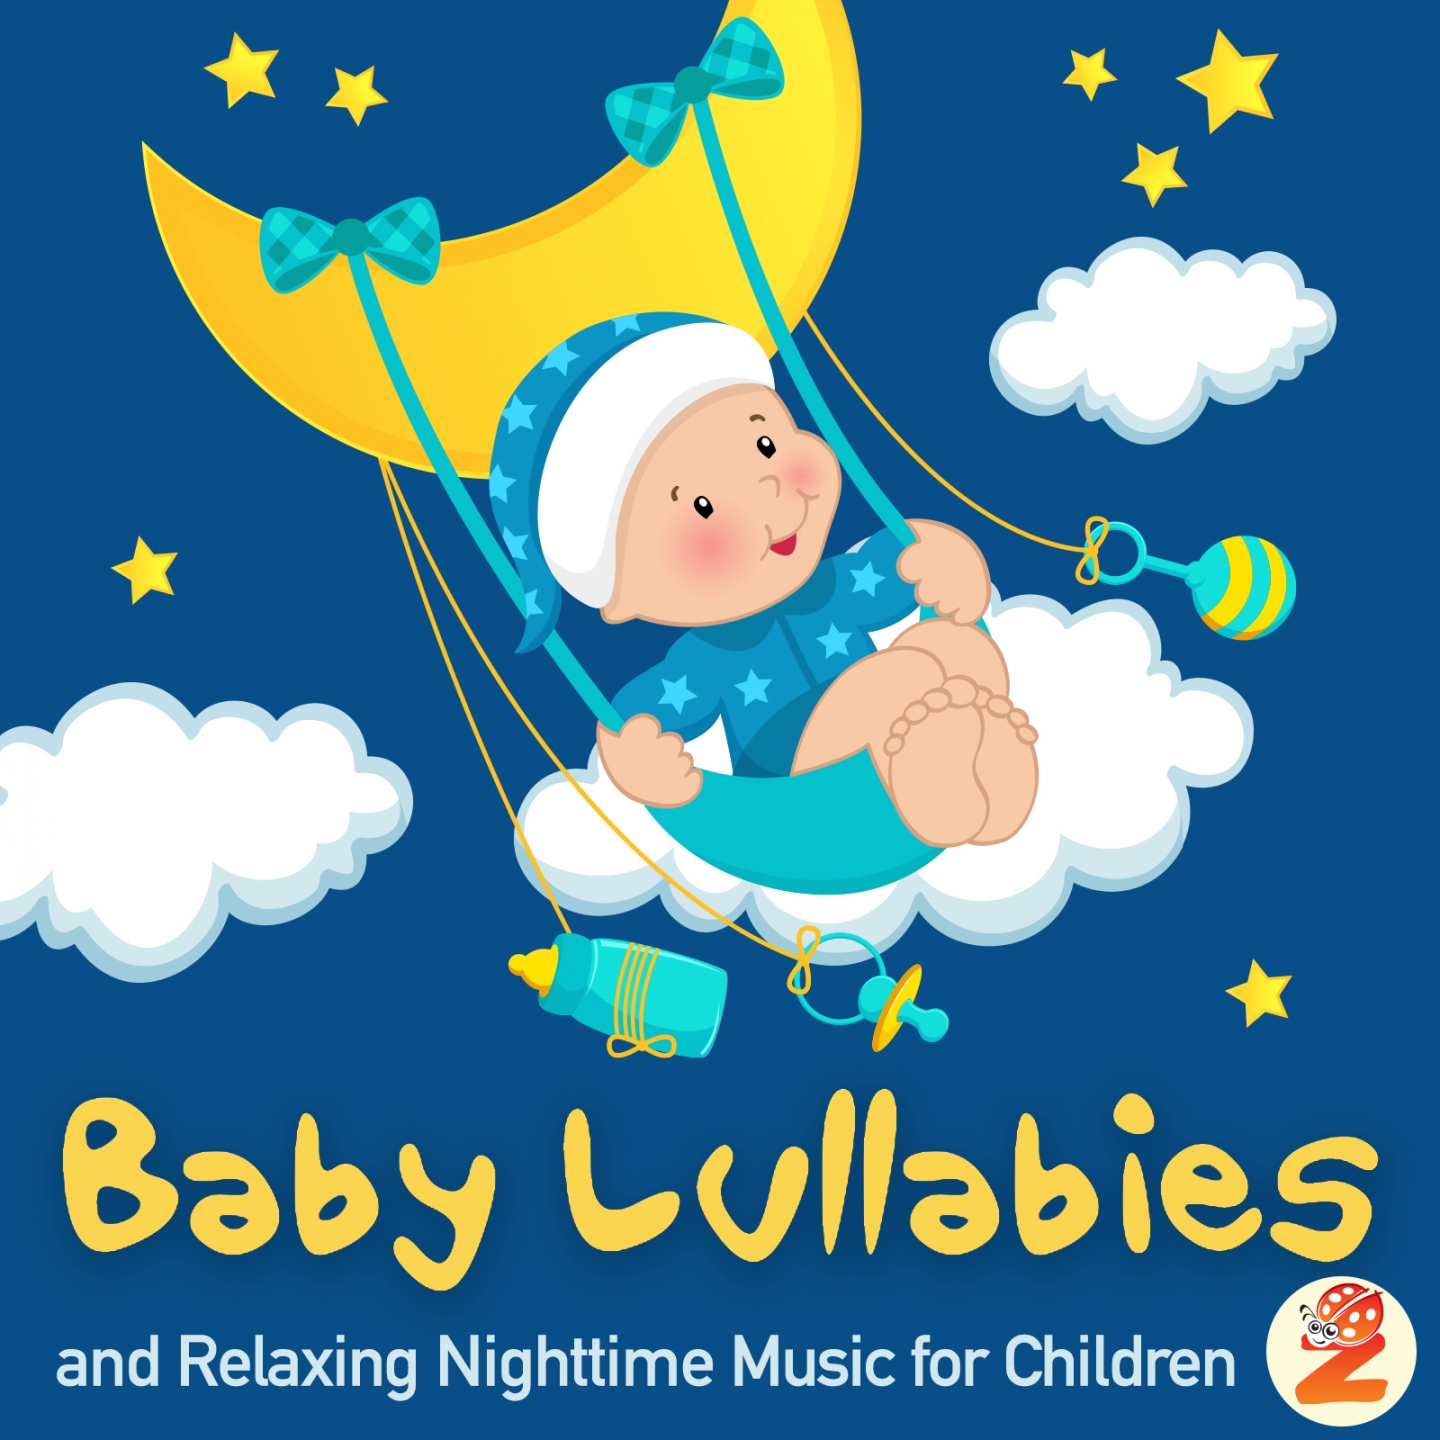 Baby Lullabies and Relaxing Nighttime Music for Children